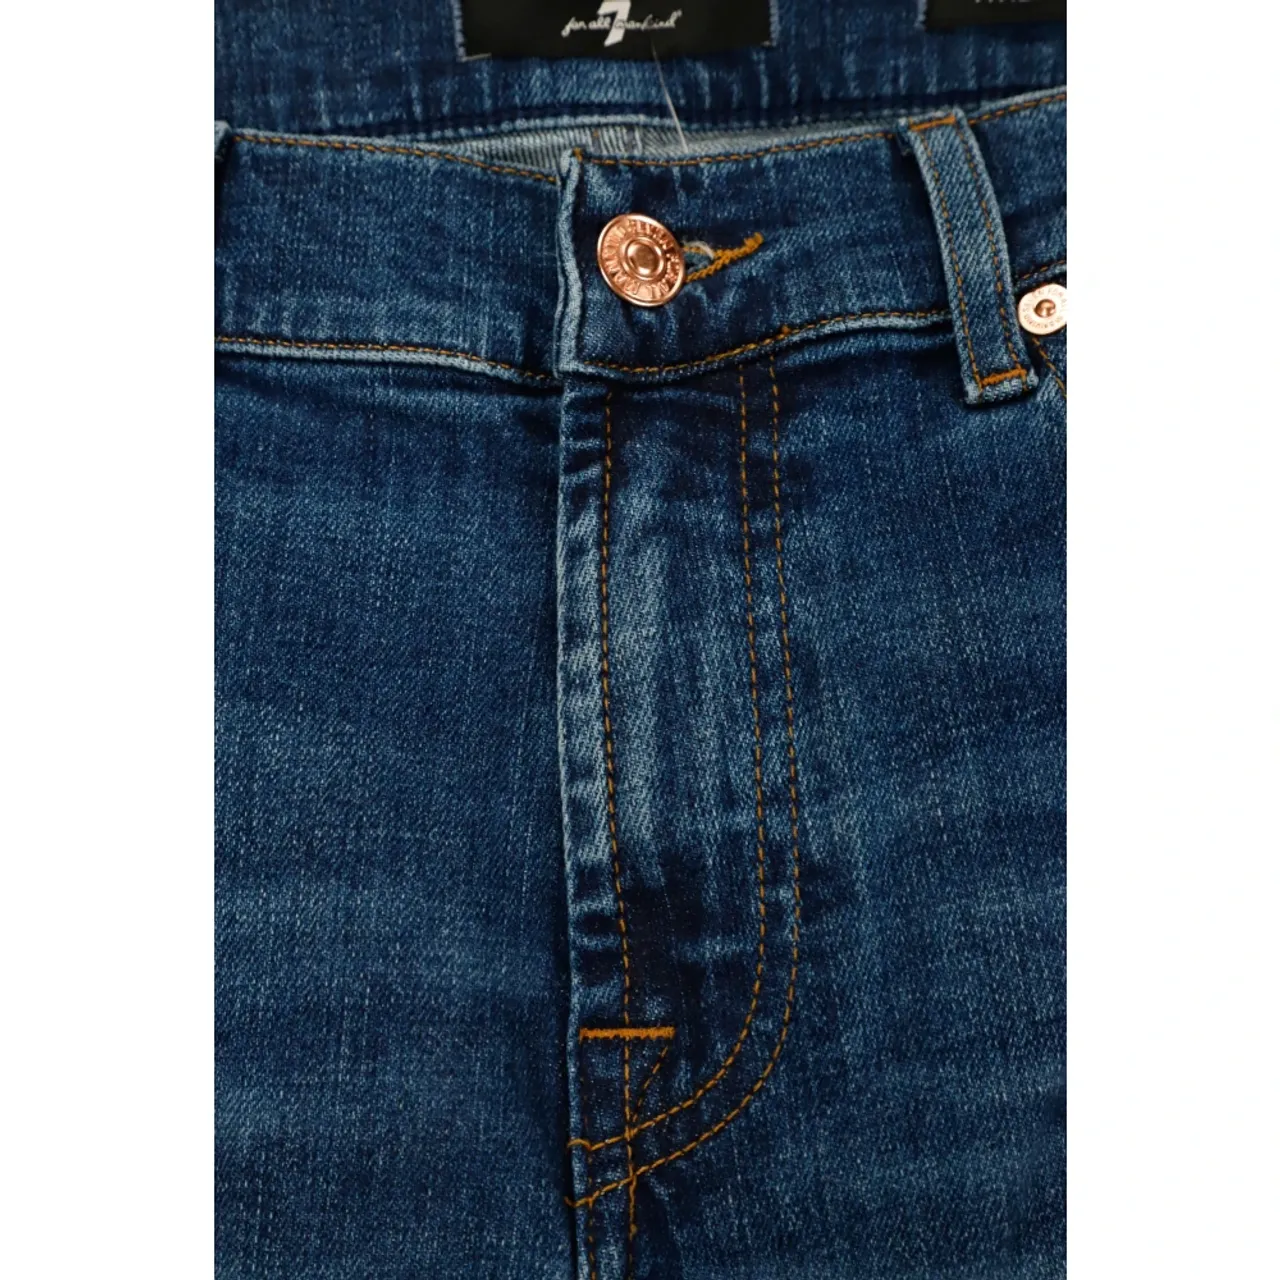 Bootcut Slim Jeans Jswbc120Sl 7 For All Mankind